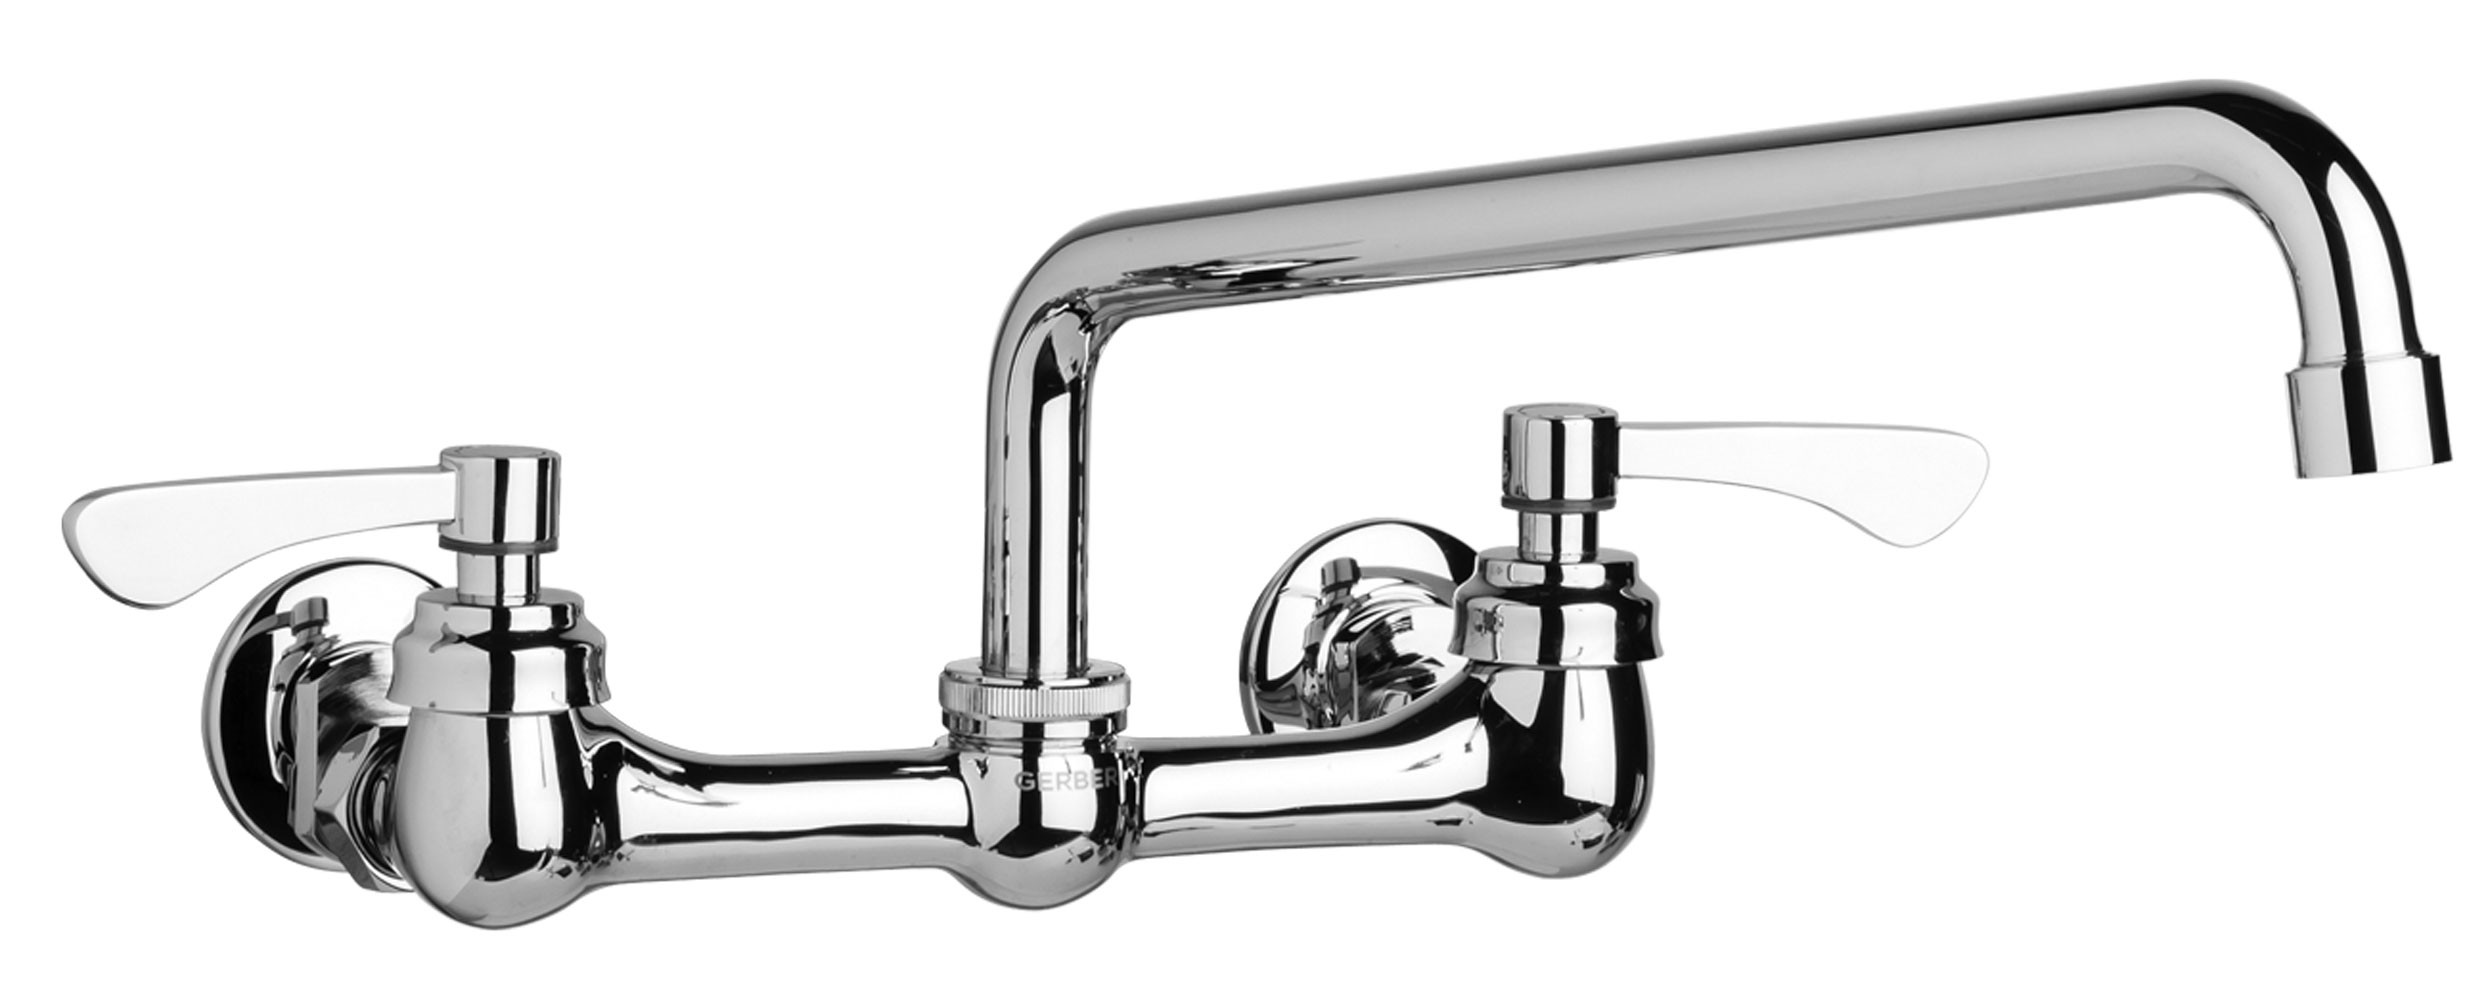 Commercial Kitchen Faucets Wall Mounted
 mercial Two Handle Wall Mount Kitchen Faucet w Lever